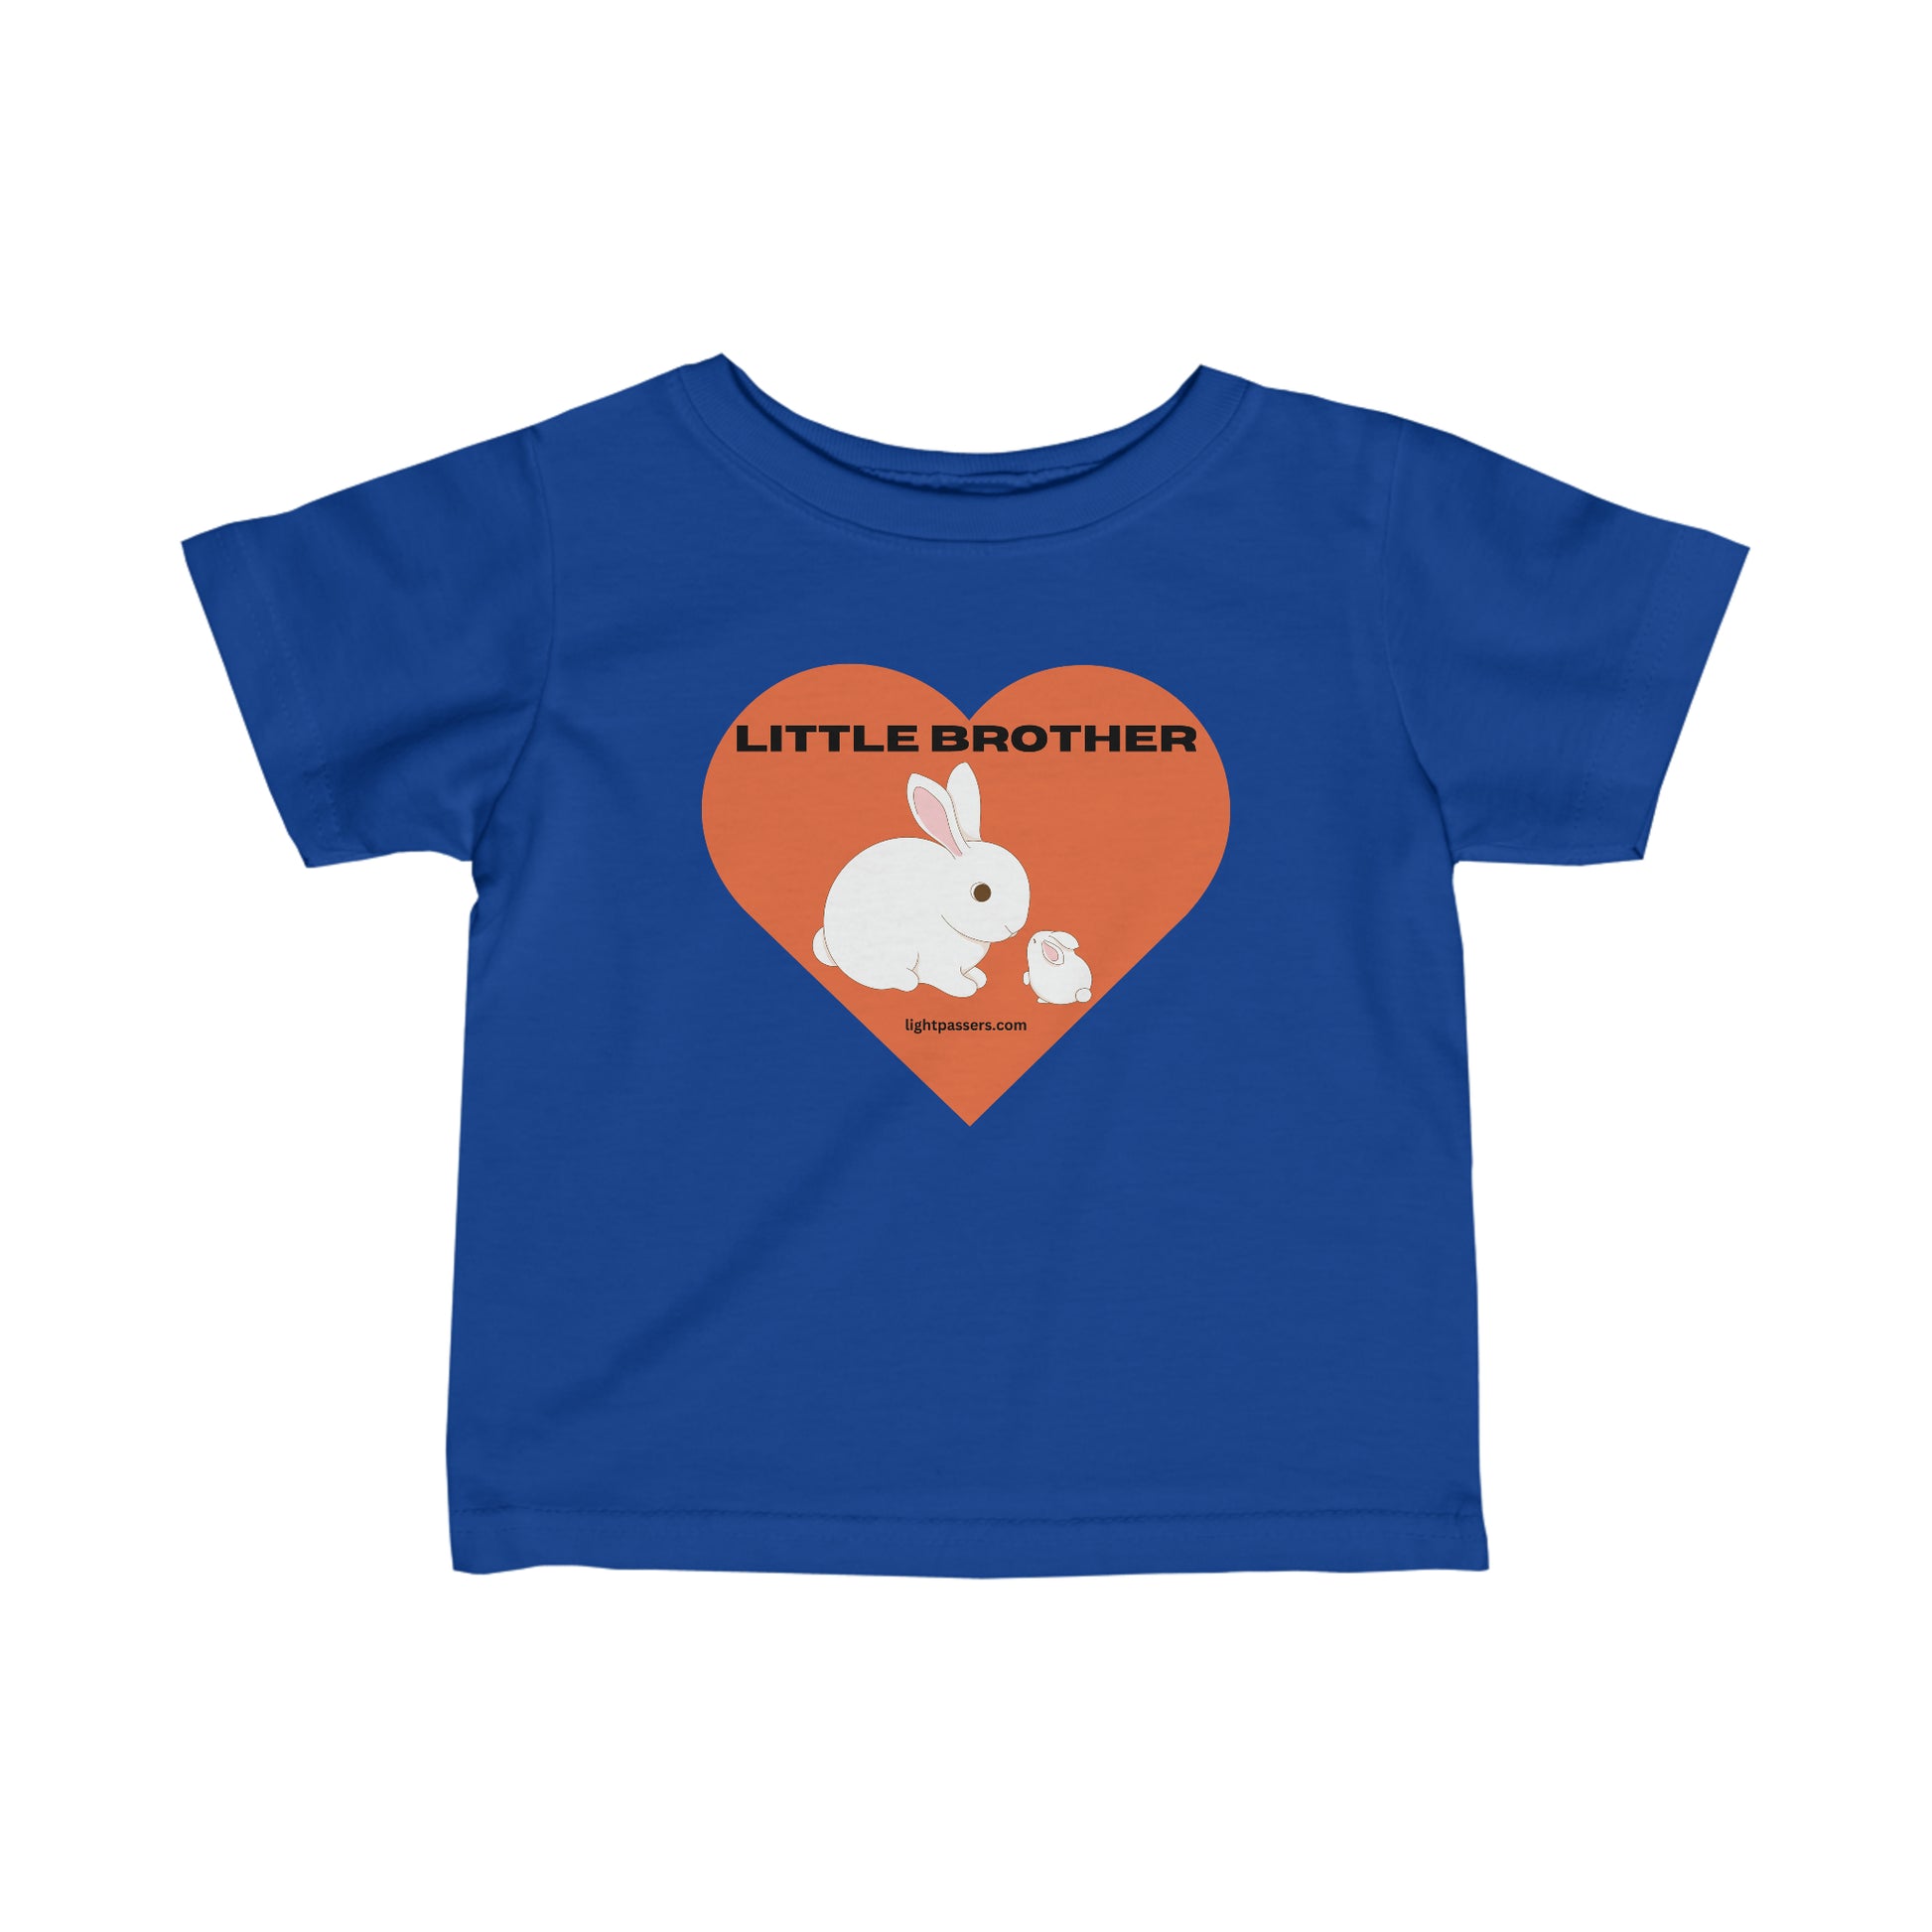 Little Brother Baby T-shirt featuring a white rabbit and heart design on a blue shirt. Infant fine jersey tee with side seams, ribbed knitting, and taped shoulders for durability and comfort.